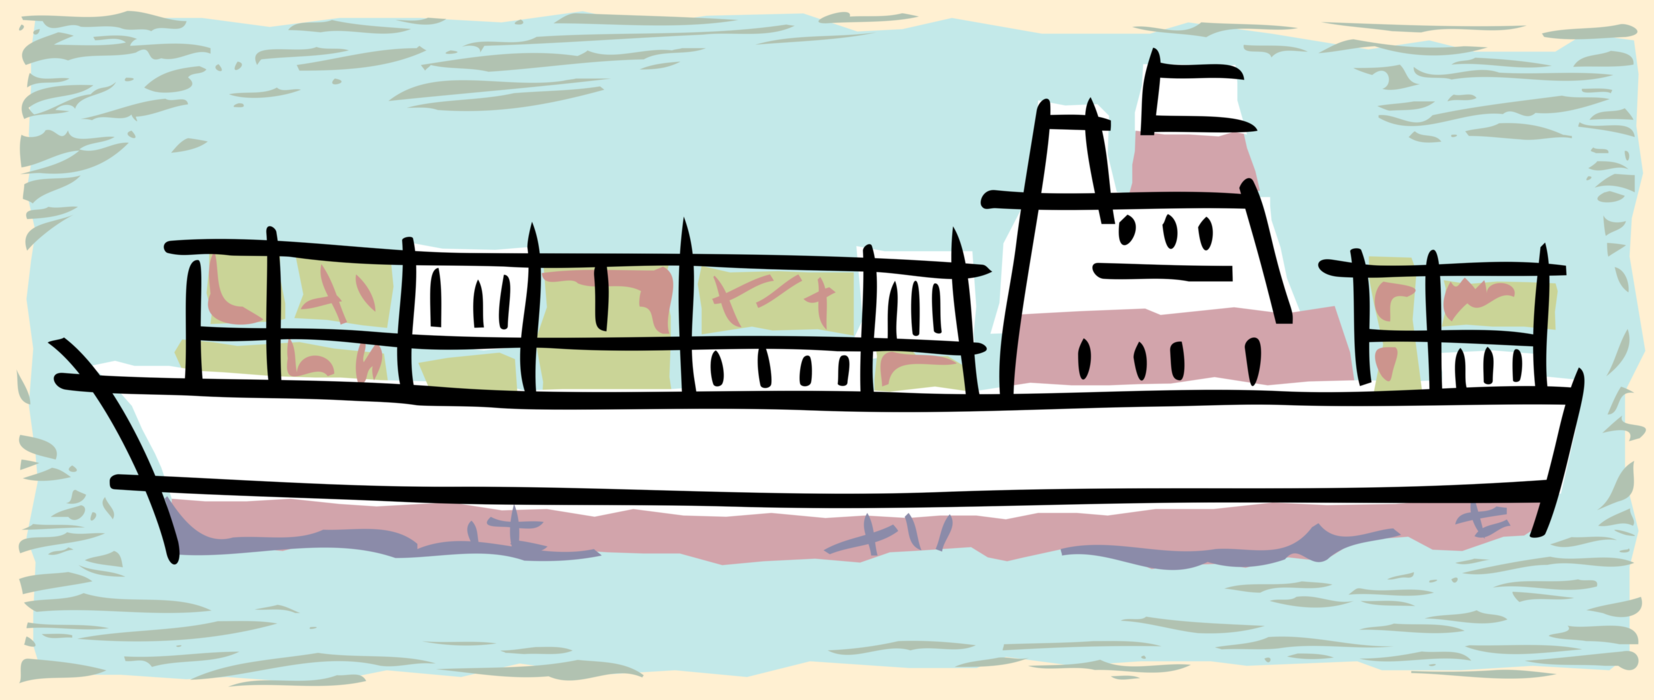 Vector Illustration of Cargo Ship or Freighter Ship or Vessel at Sea Carries Goods and Materials